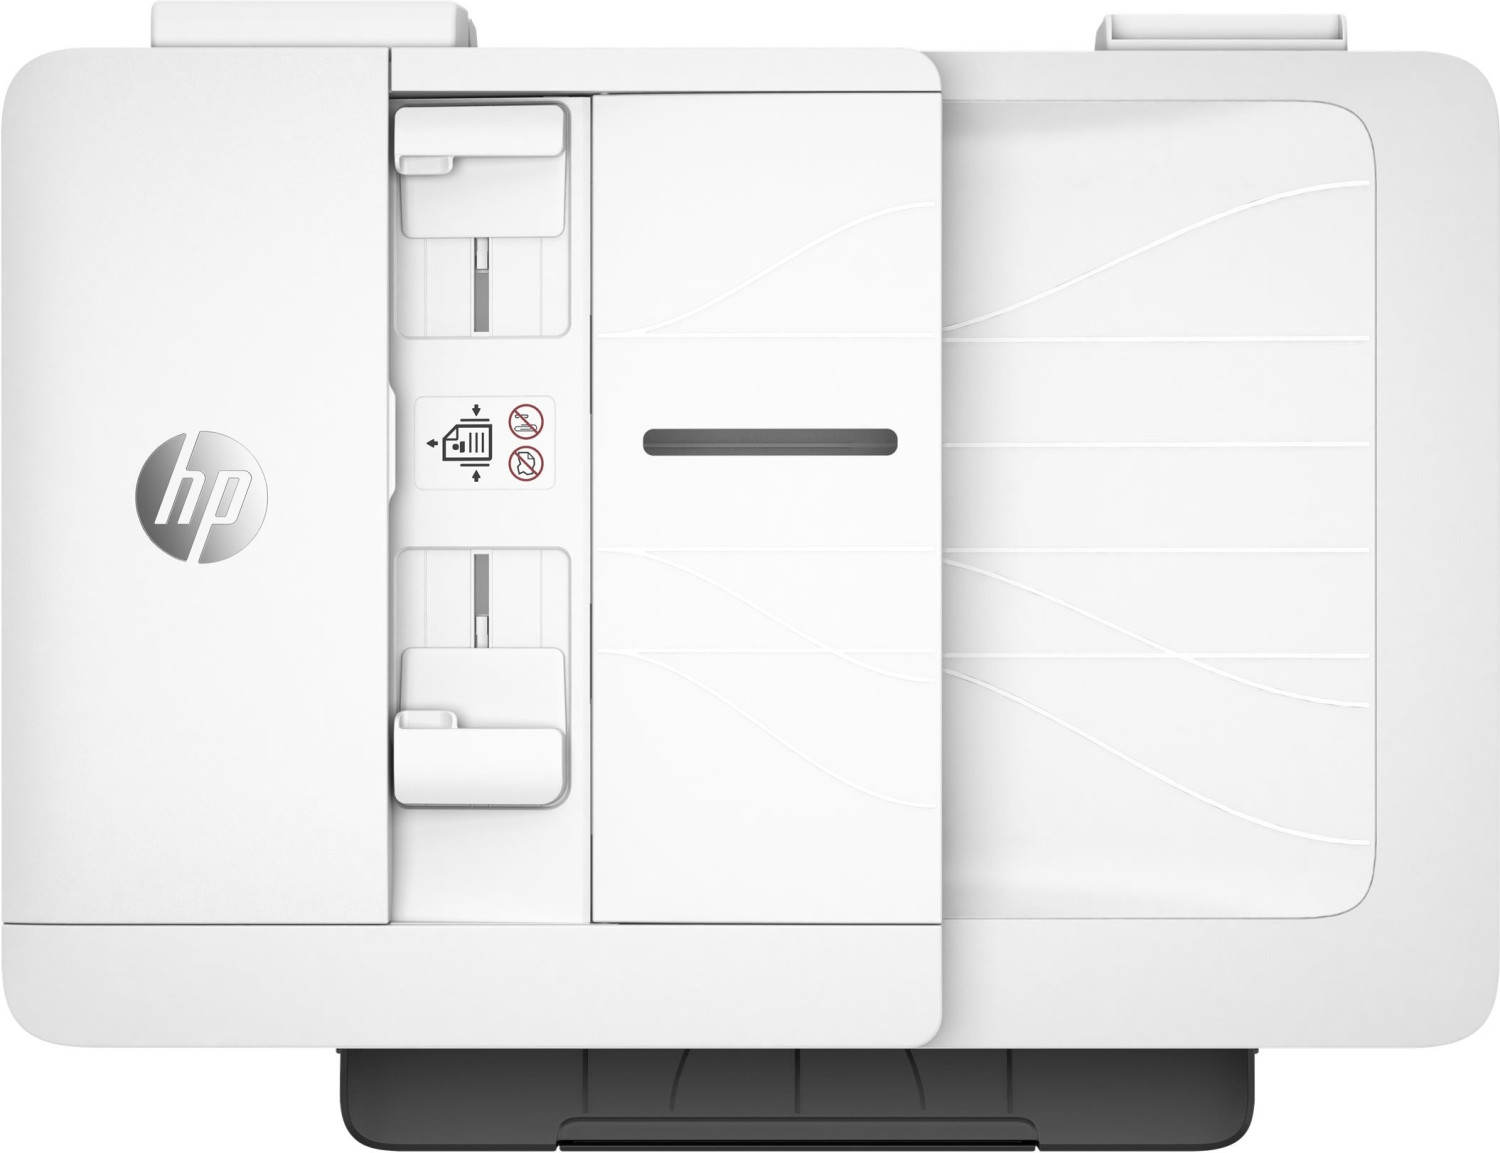 Cartouche HP Officejet pro 7740 All-in-One pas cher